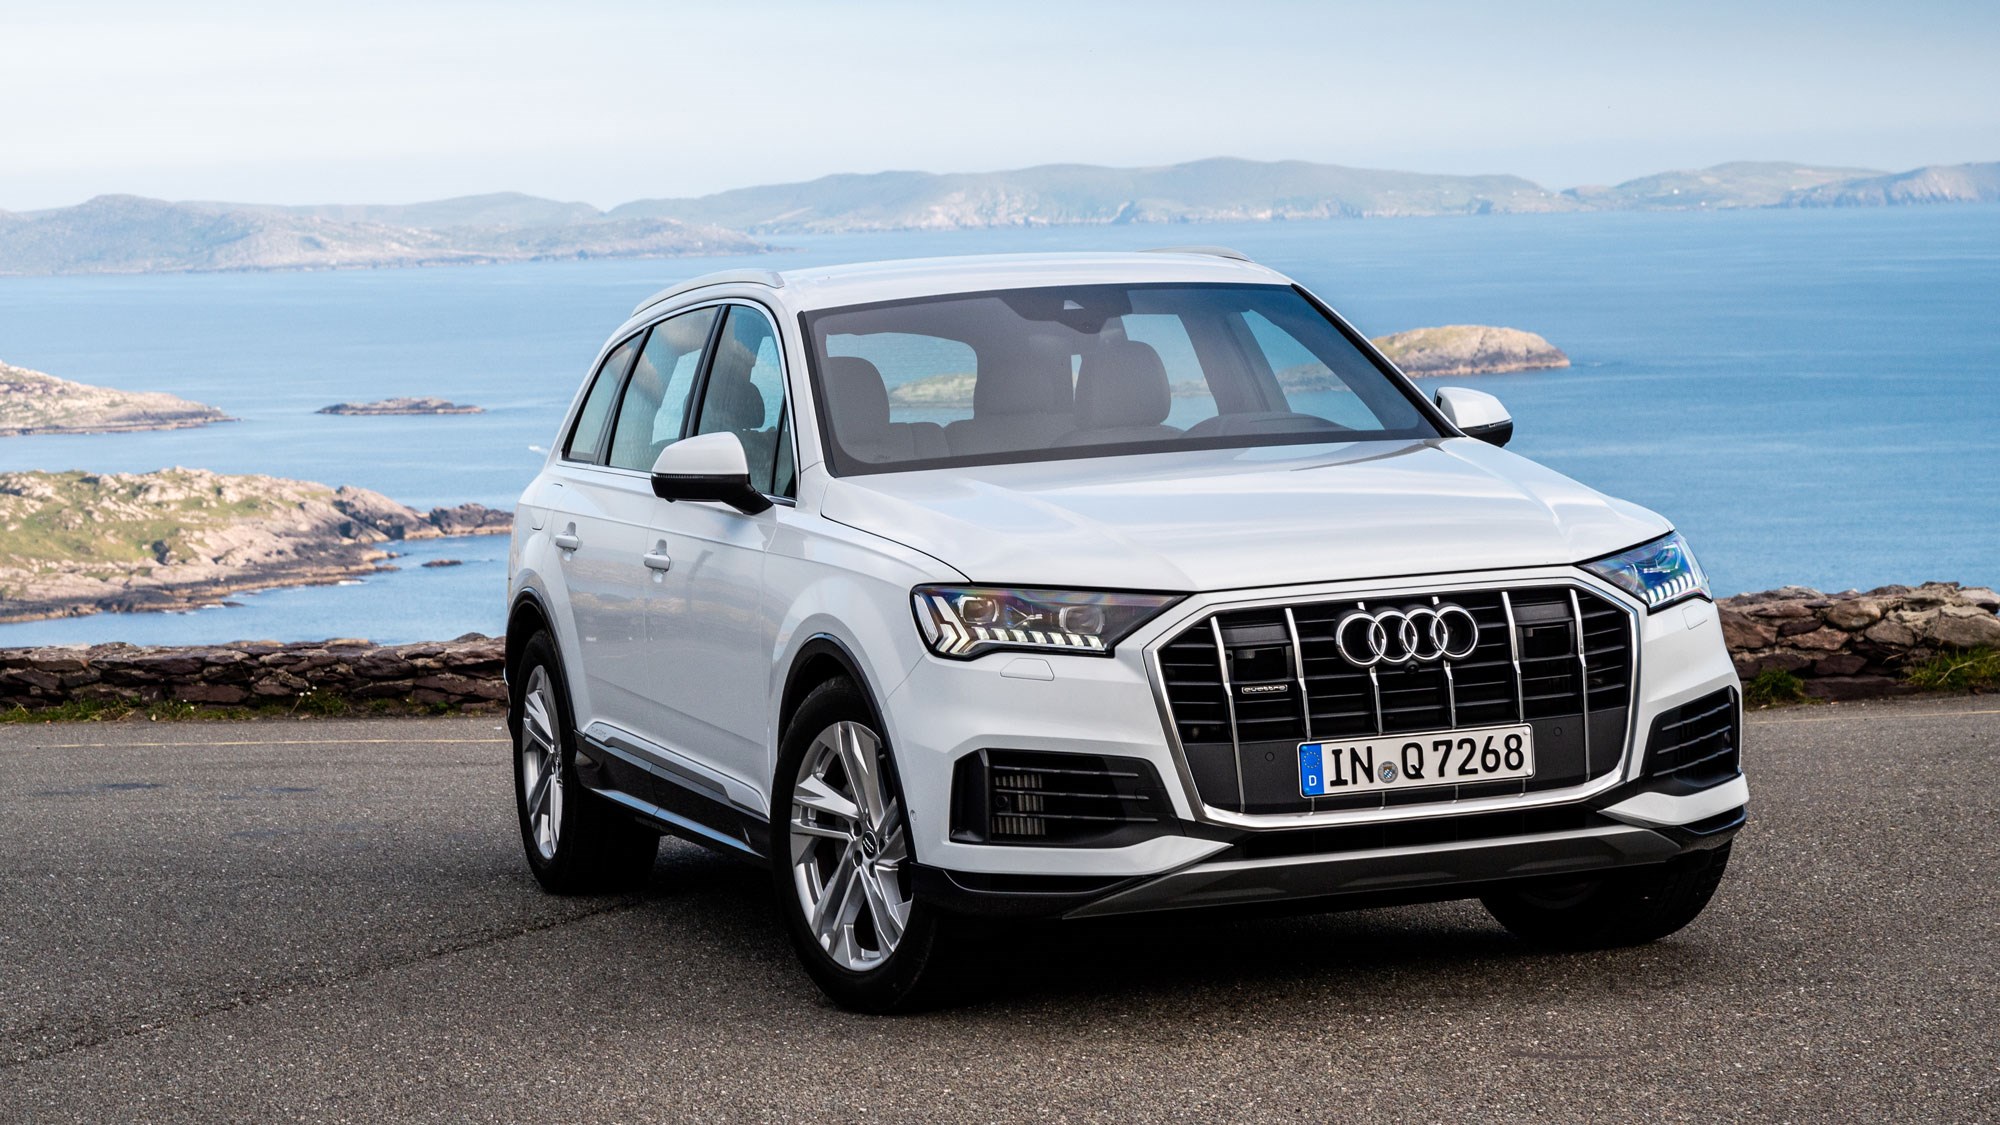 The new Q7 from the front